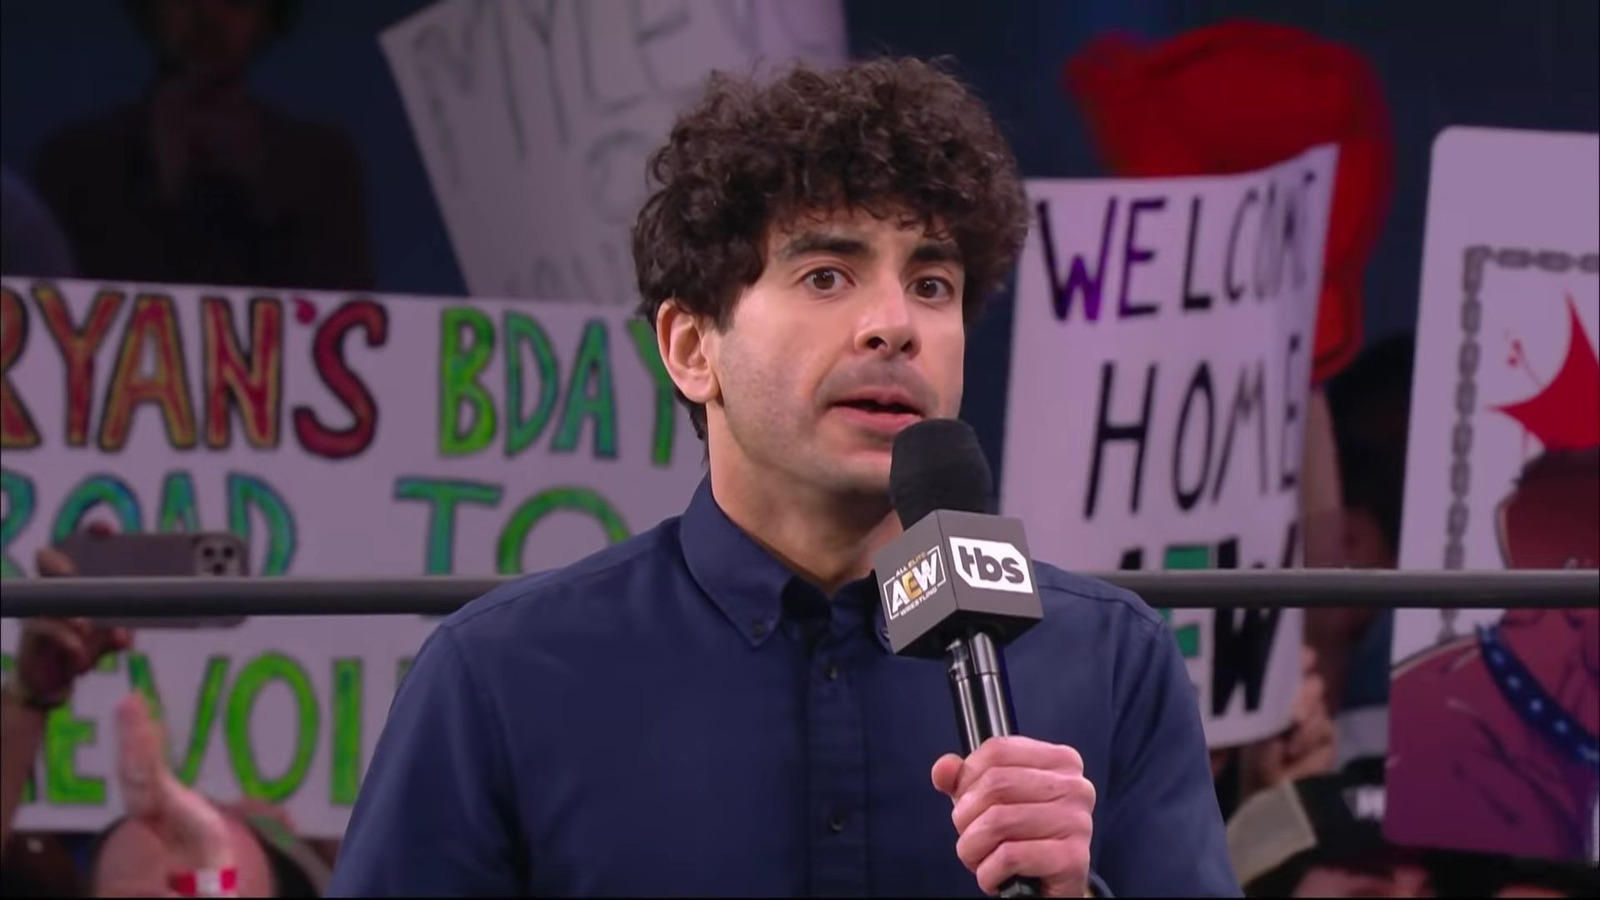 AEW Boss Tony Khan Trades Shots With WWE Hall Of Famer Eric Bischoff